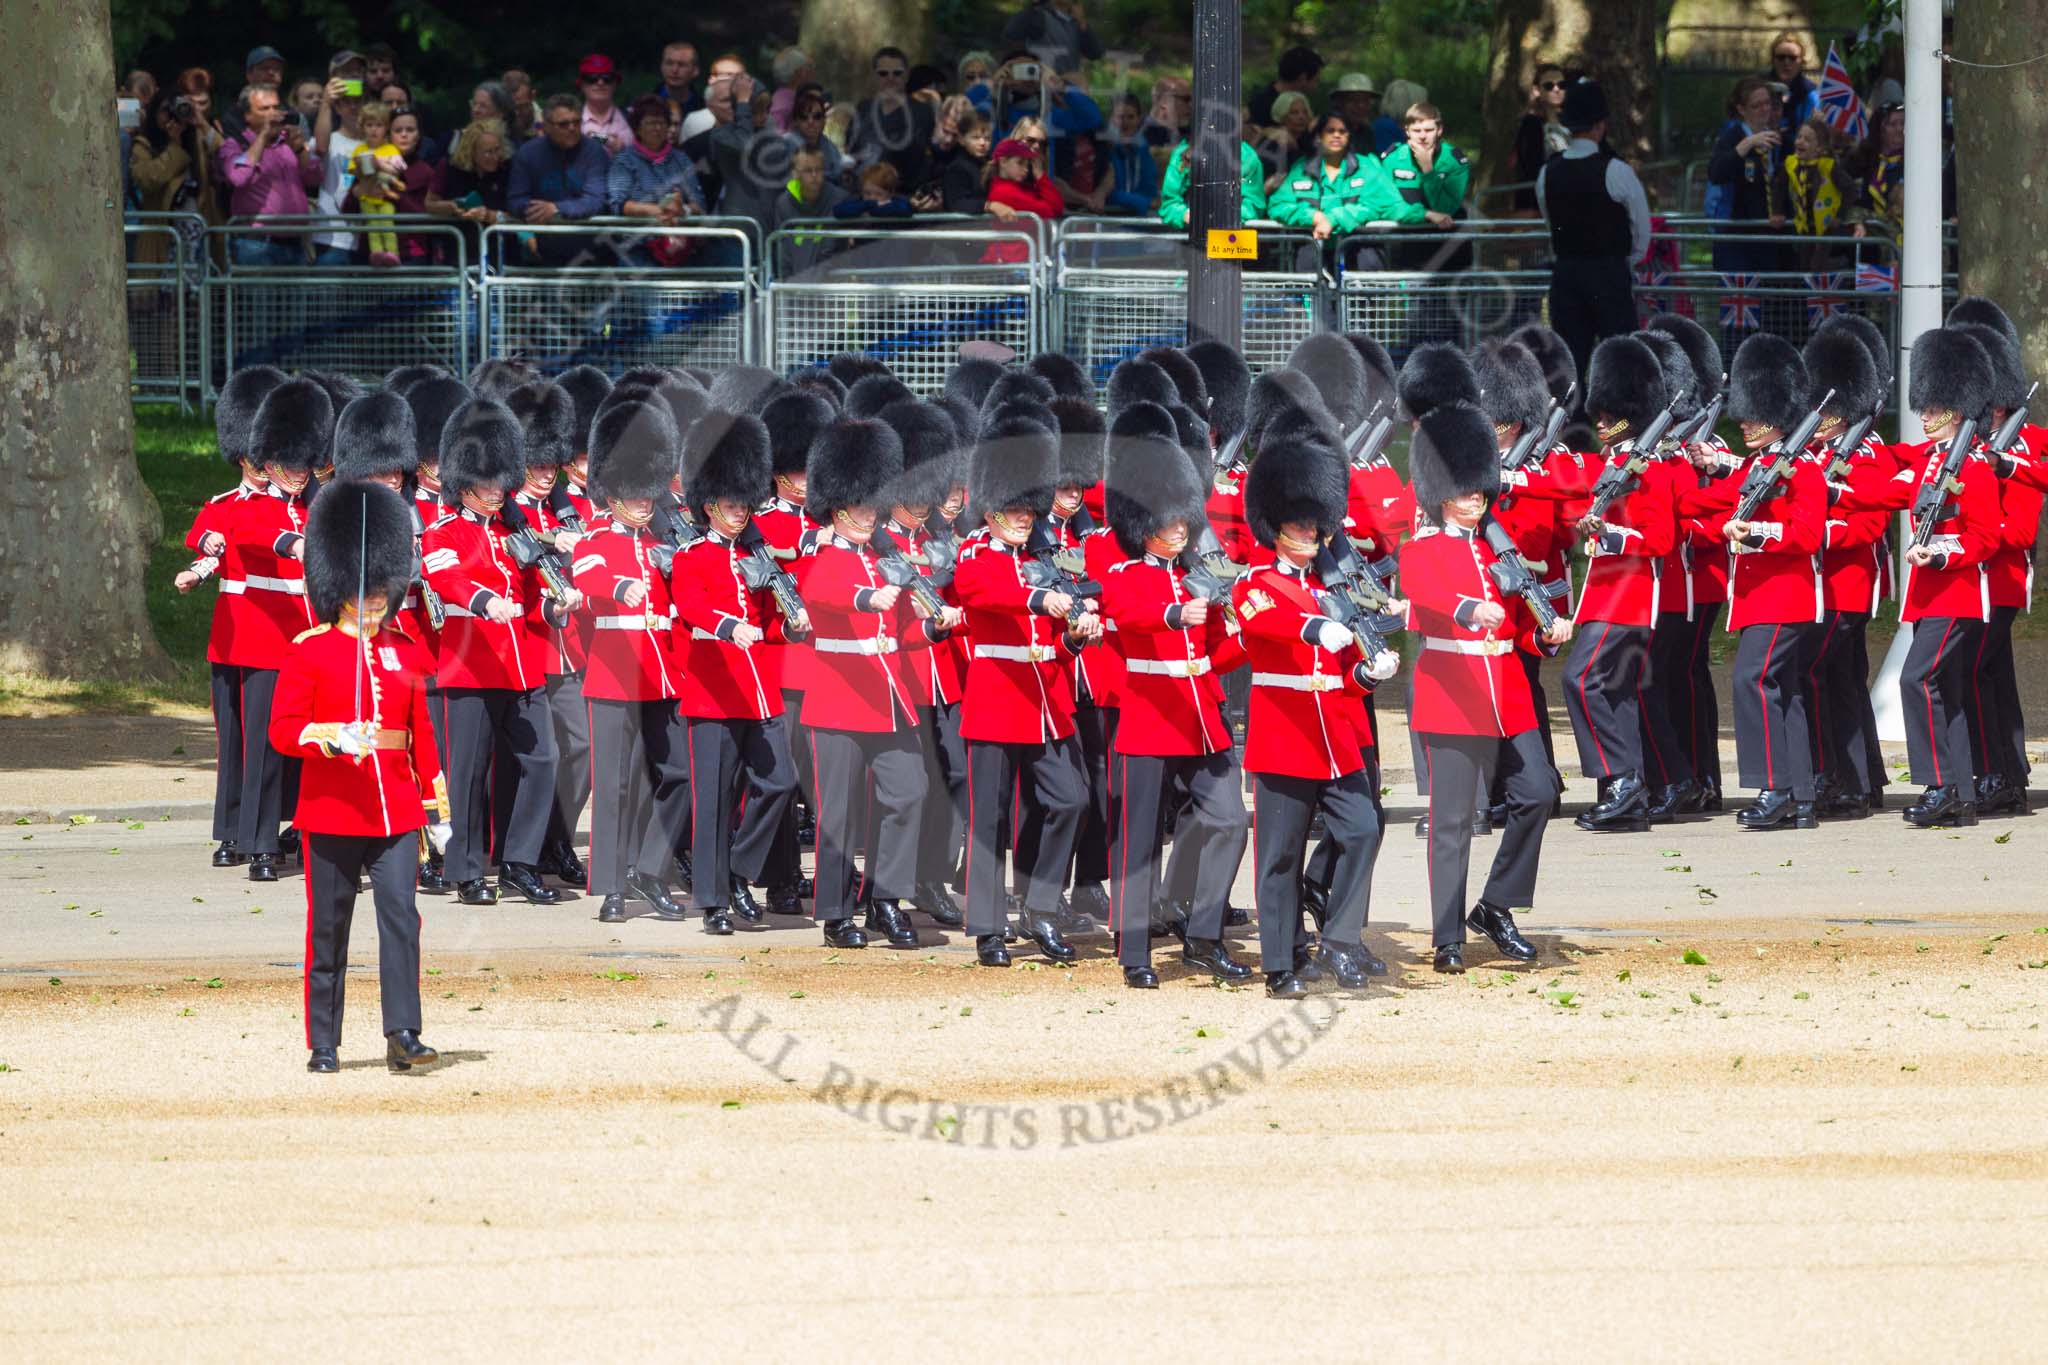 The Colonel's Review 2015.
Horse Guards Parade, Westminster,
London,

United Kingdom,
on 06 June 2015 at 10:25, image #57